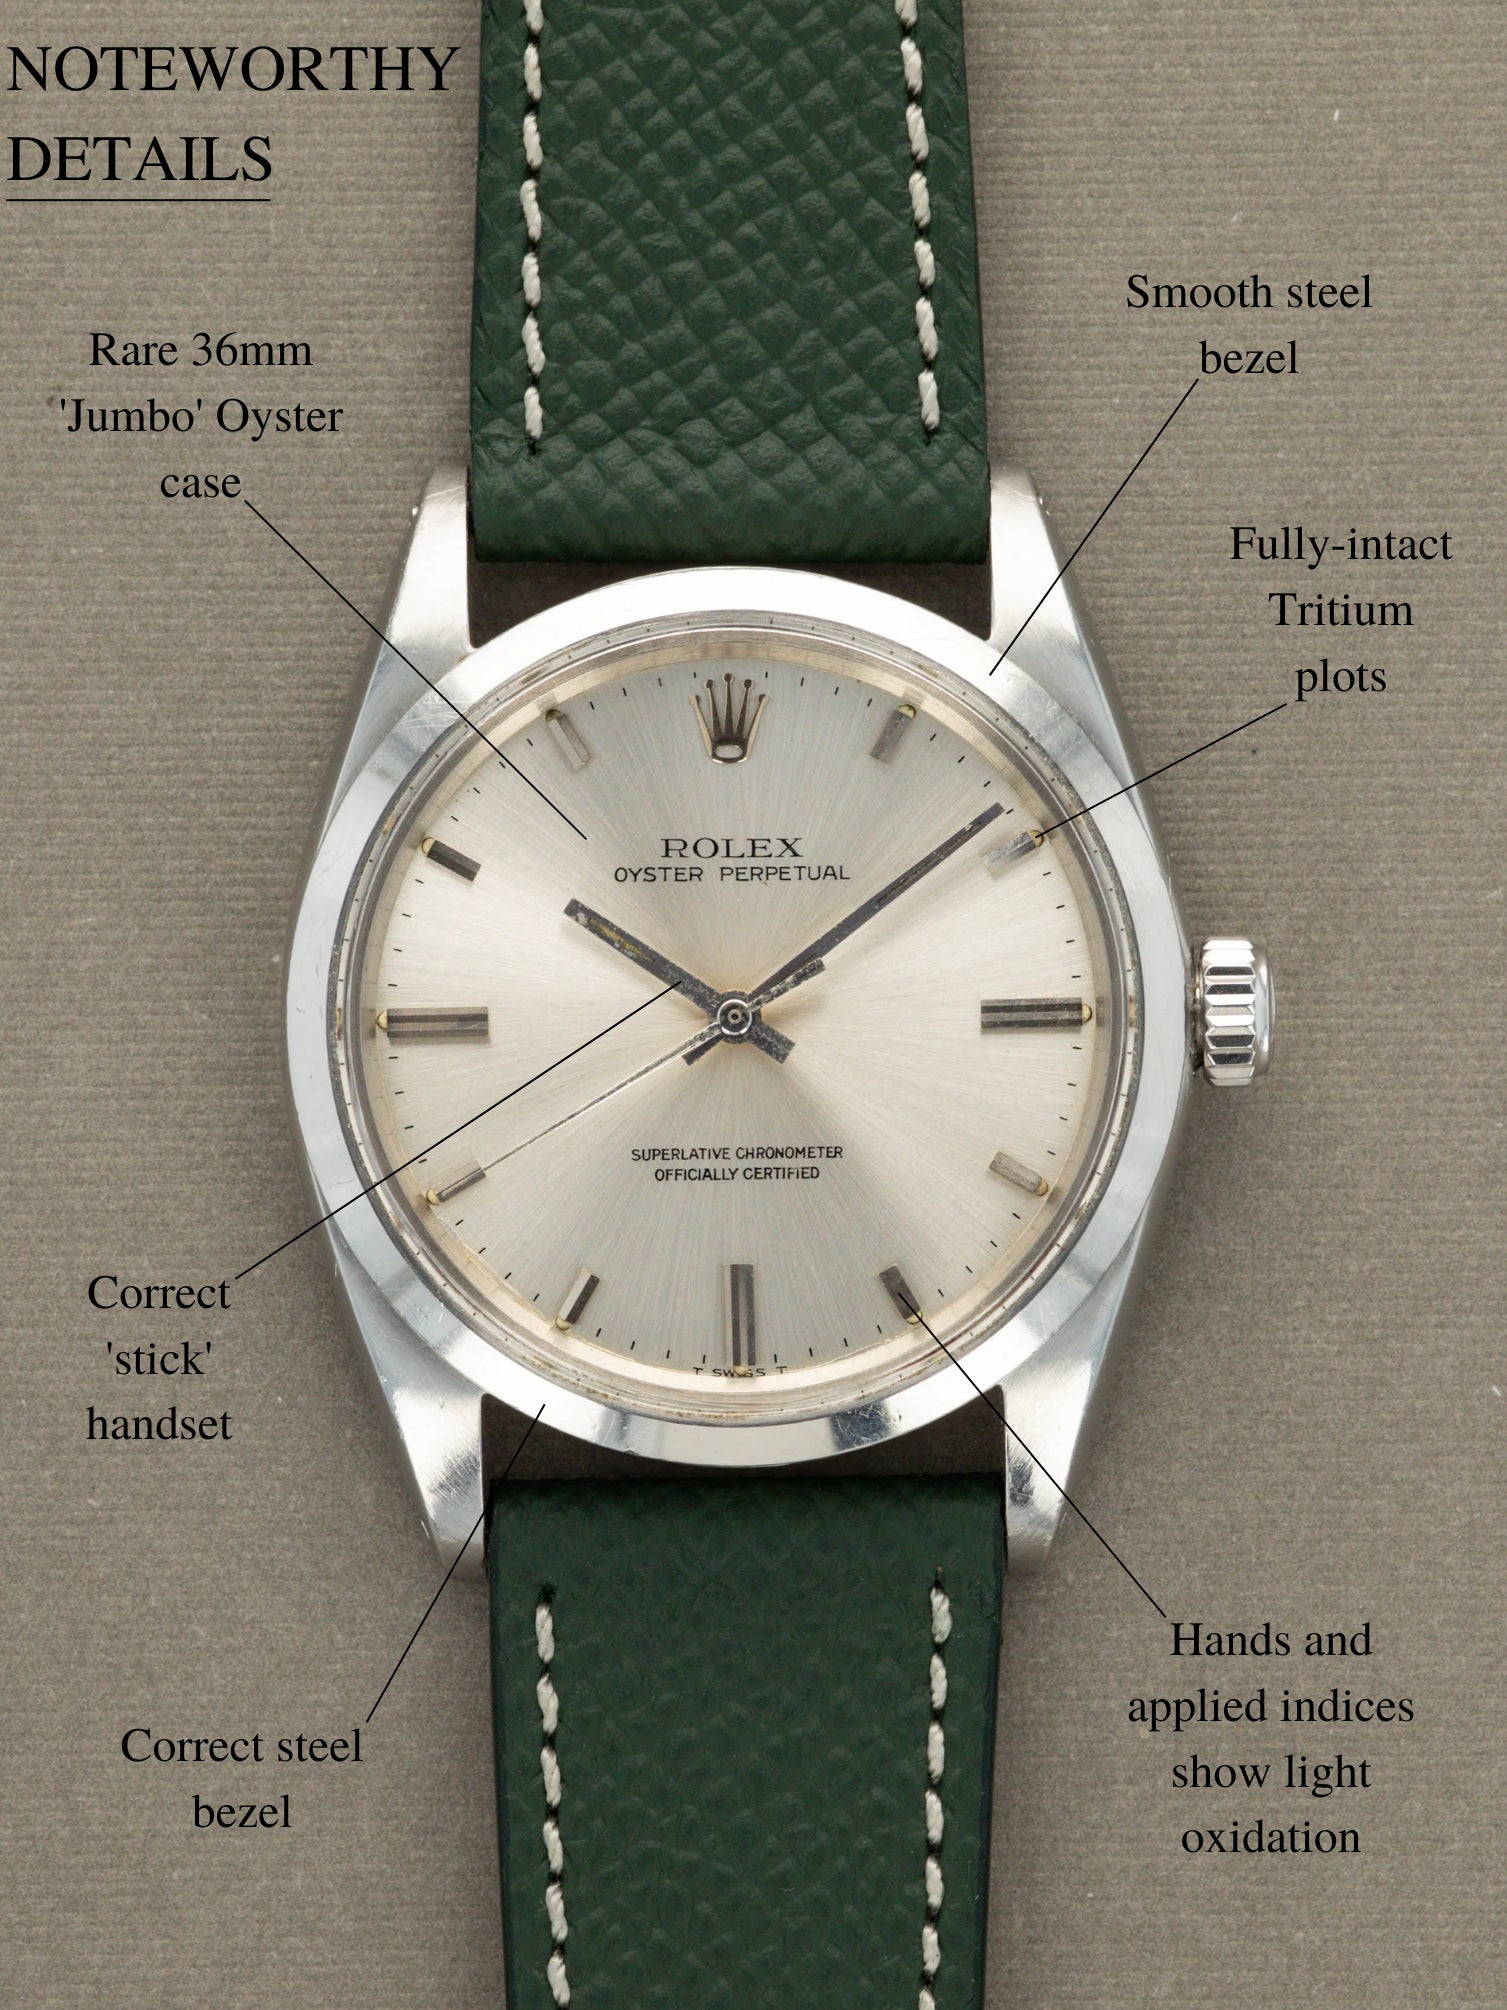 Rolex Oyster Perpetual Ref. 1018 - 'Jumbo'